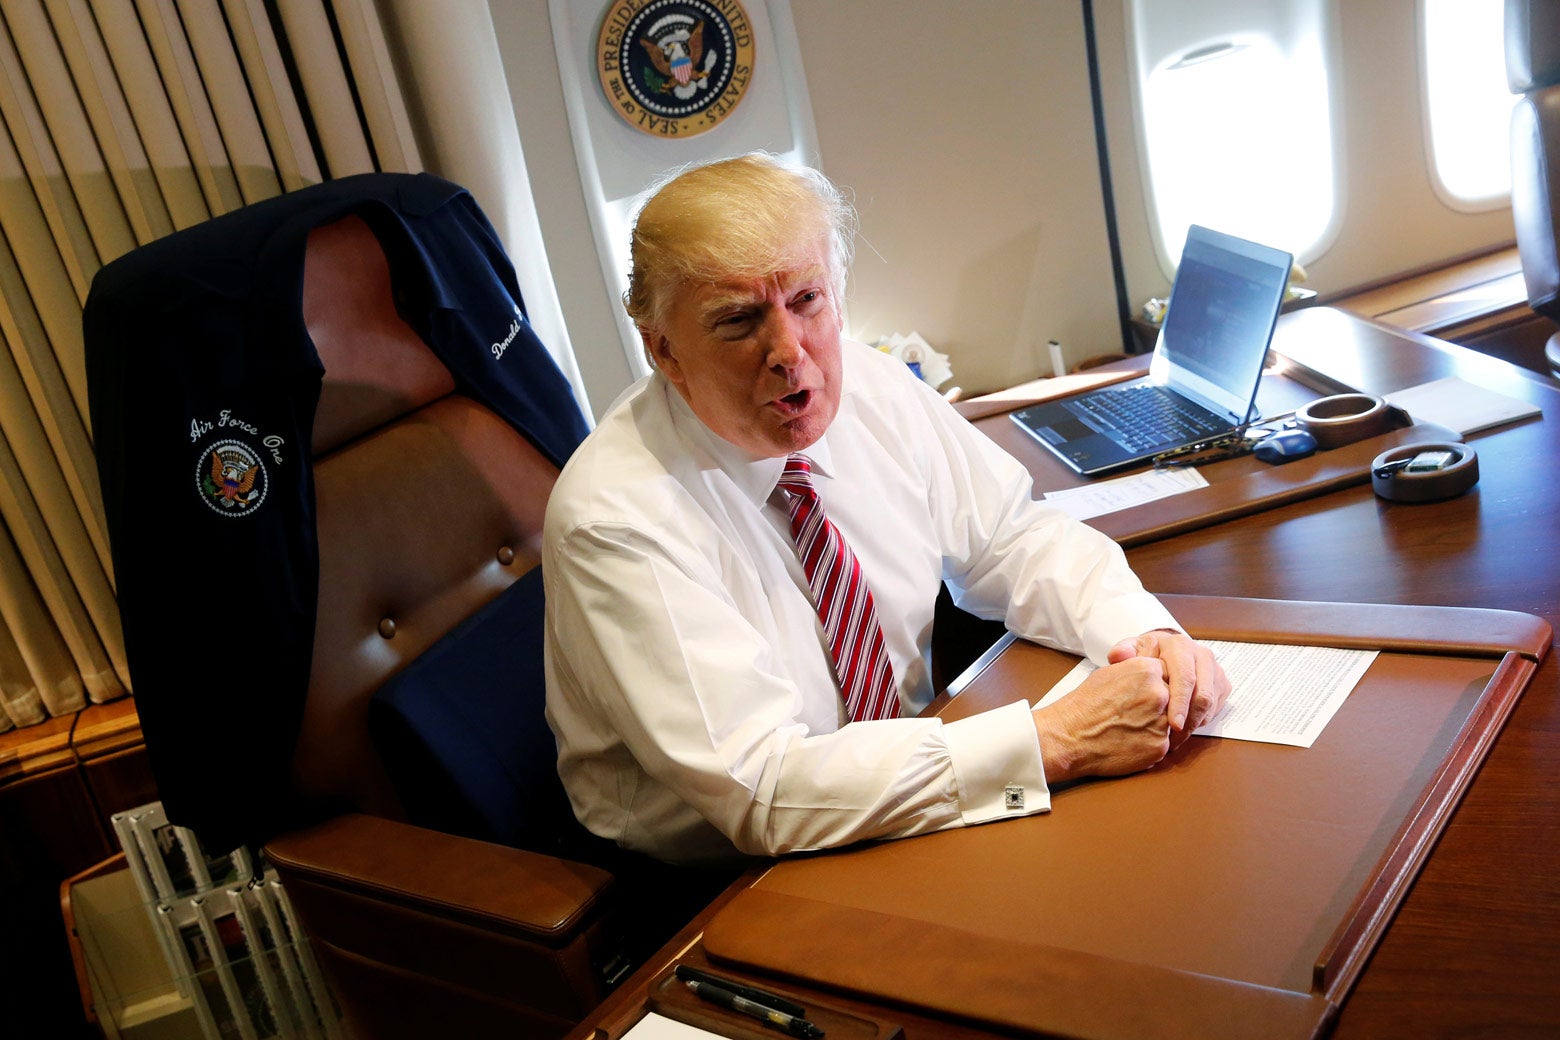 President Trump aboard Air Force One on Jan. 26, 2017. He's at a desk and a computer is behind him, but he's not using it.